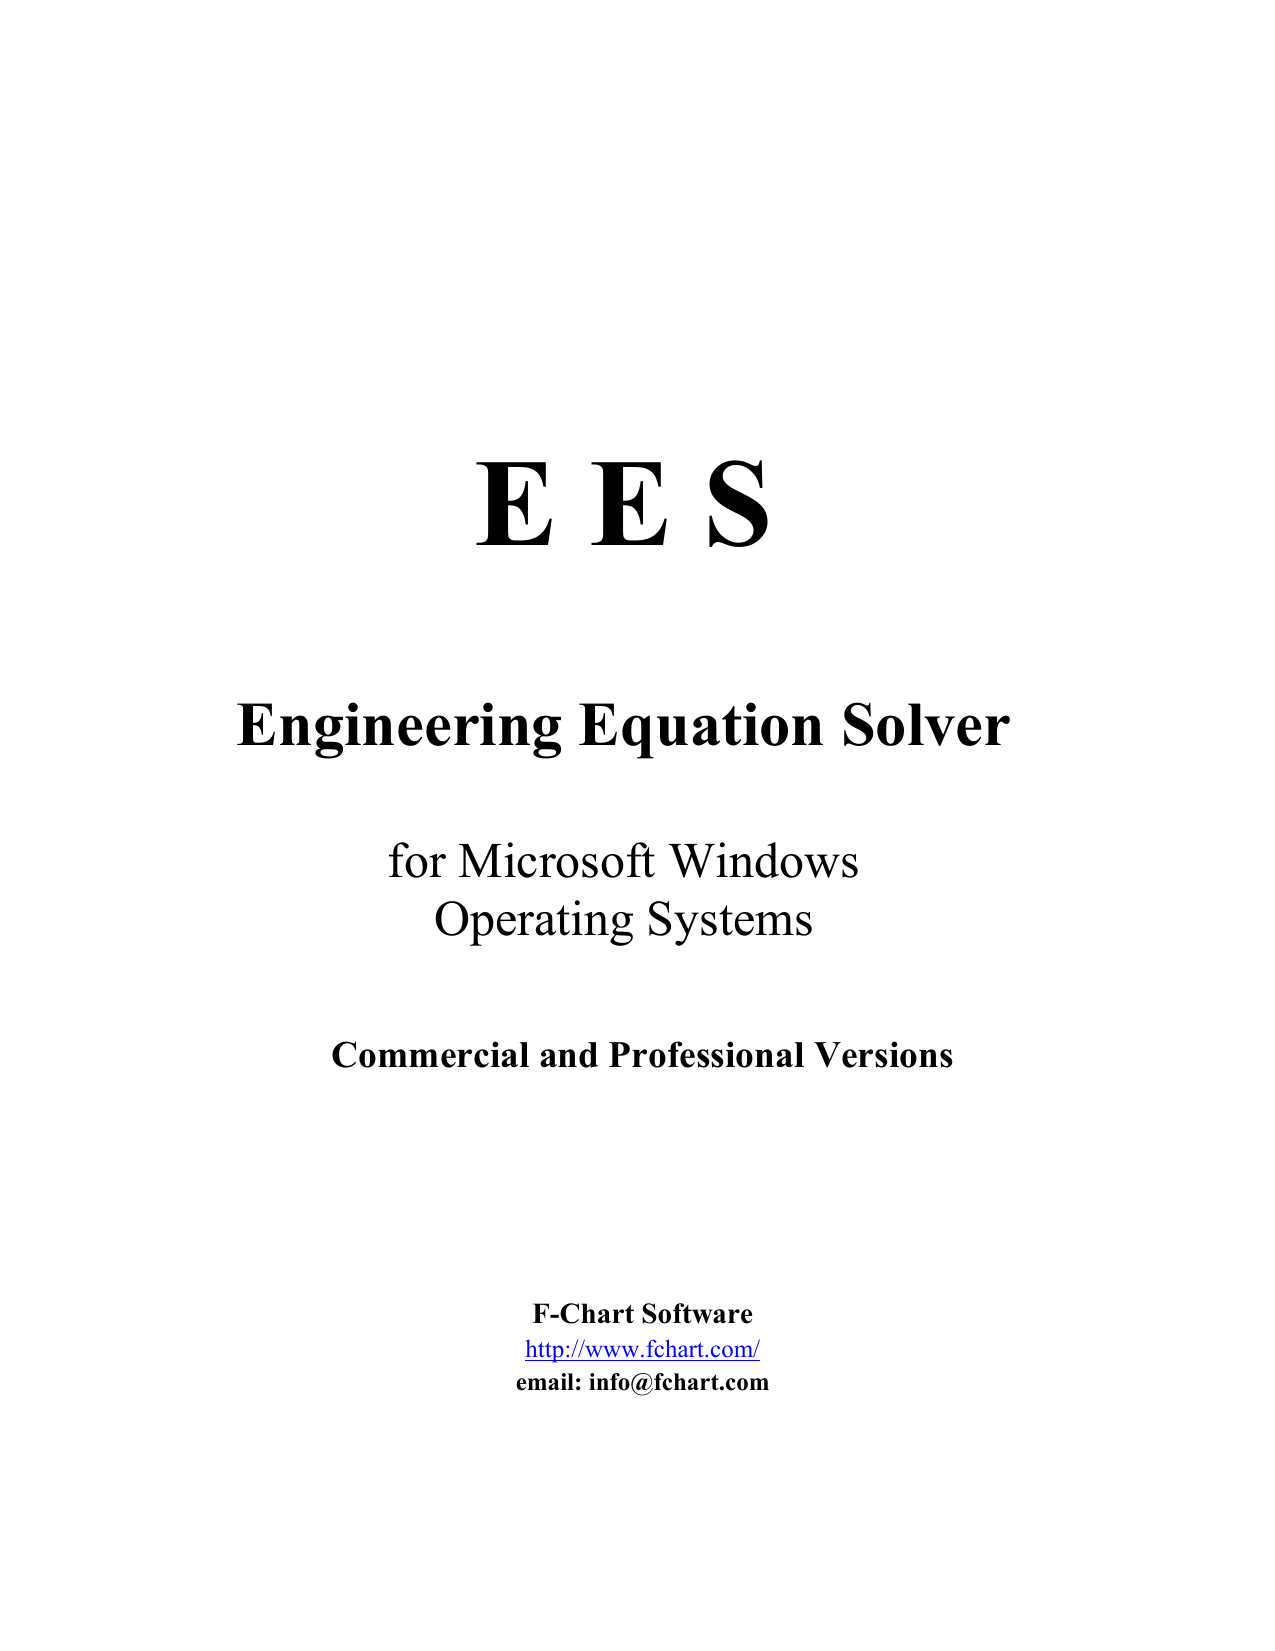 engineering equation solver ees torrent